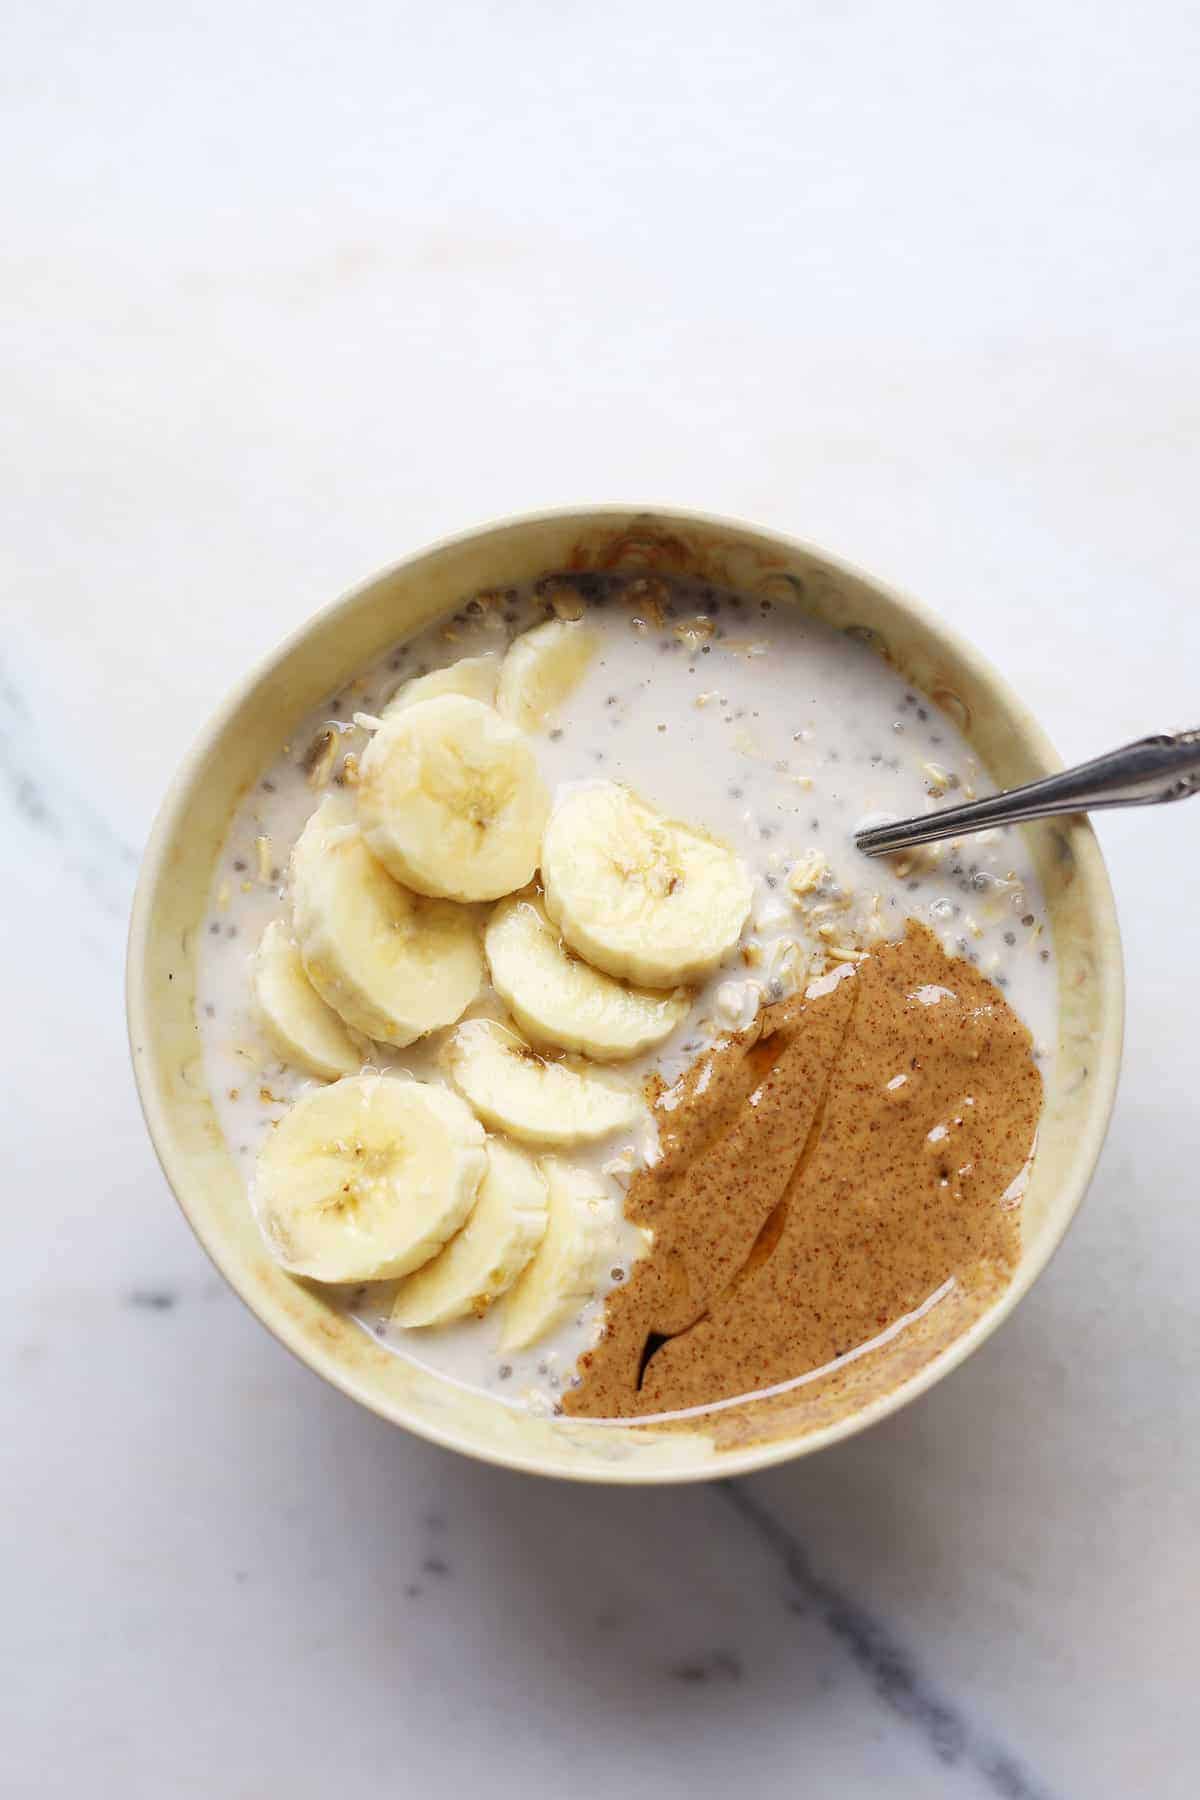 An easy chia bowl on the table topped with bananas and nut butter.